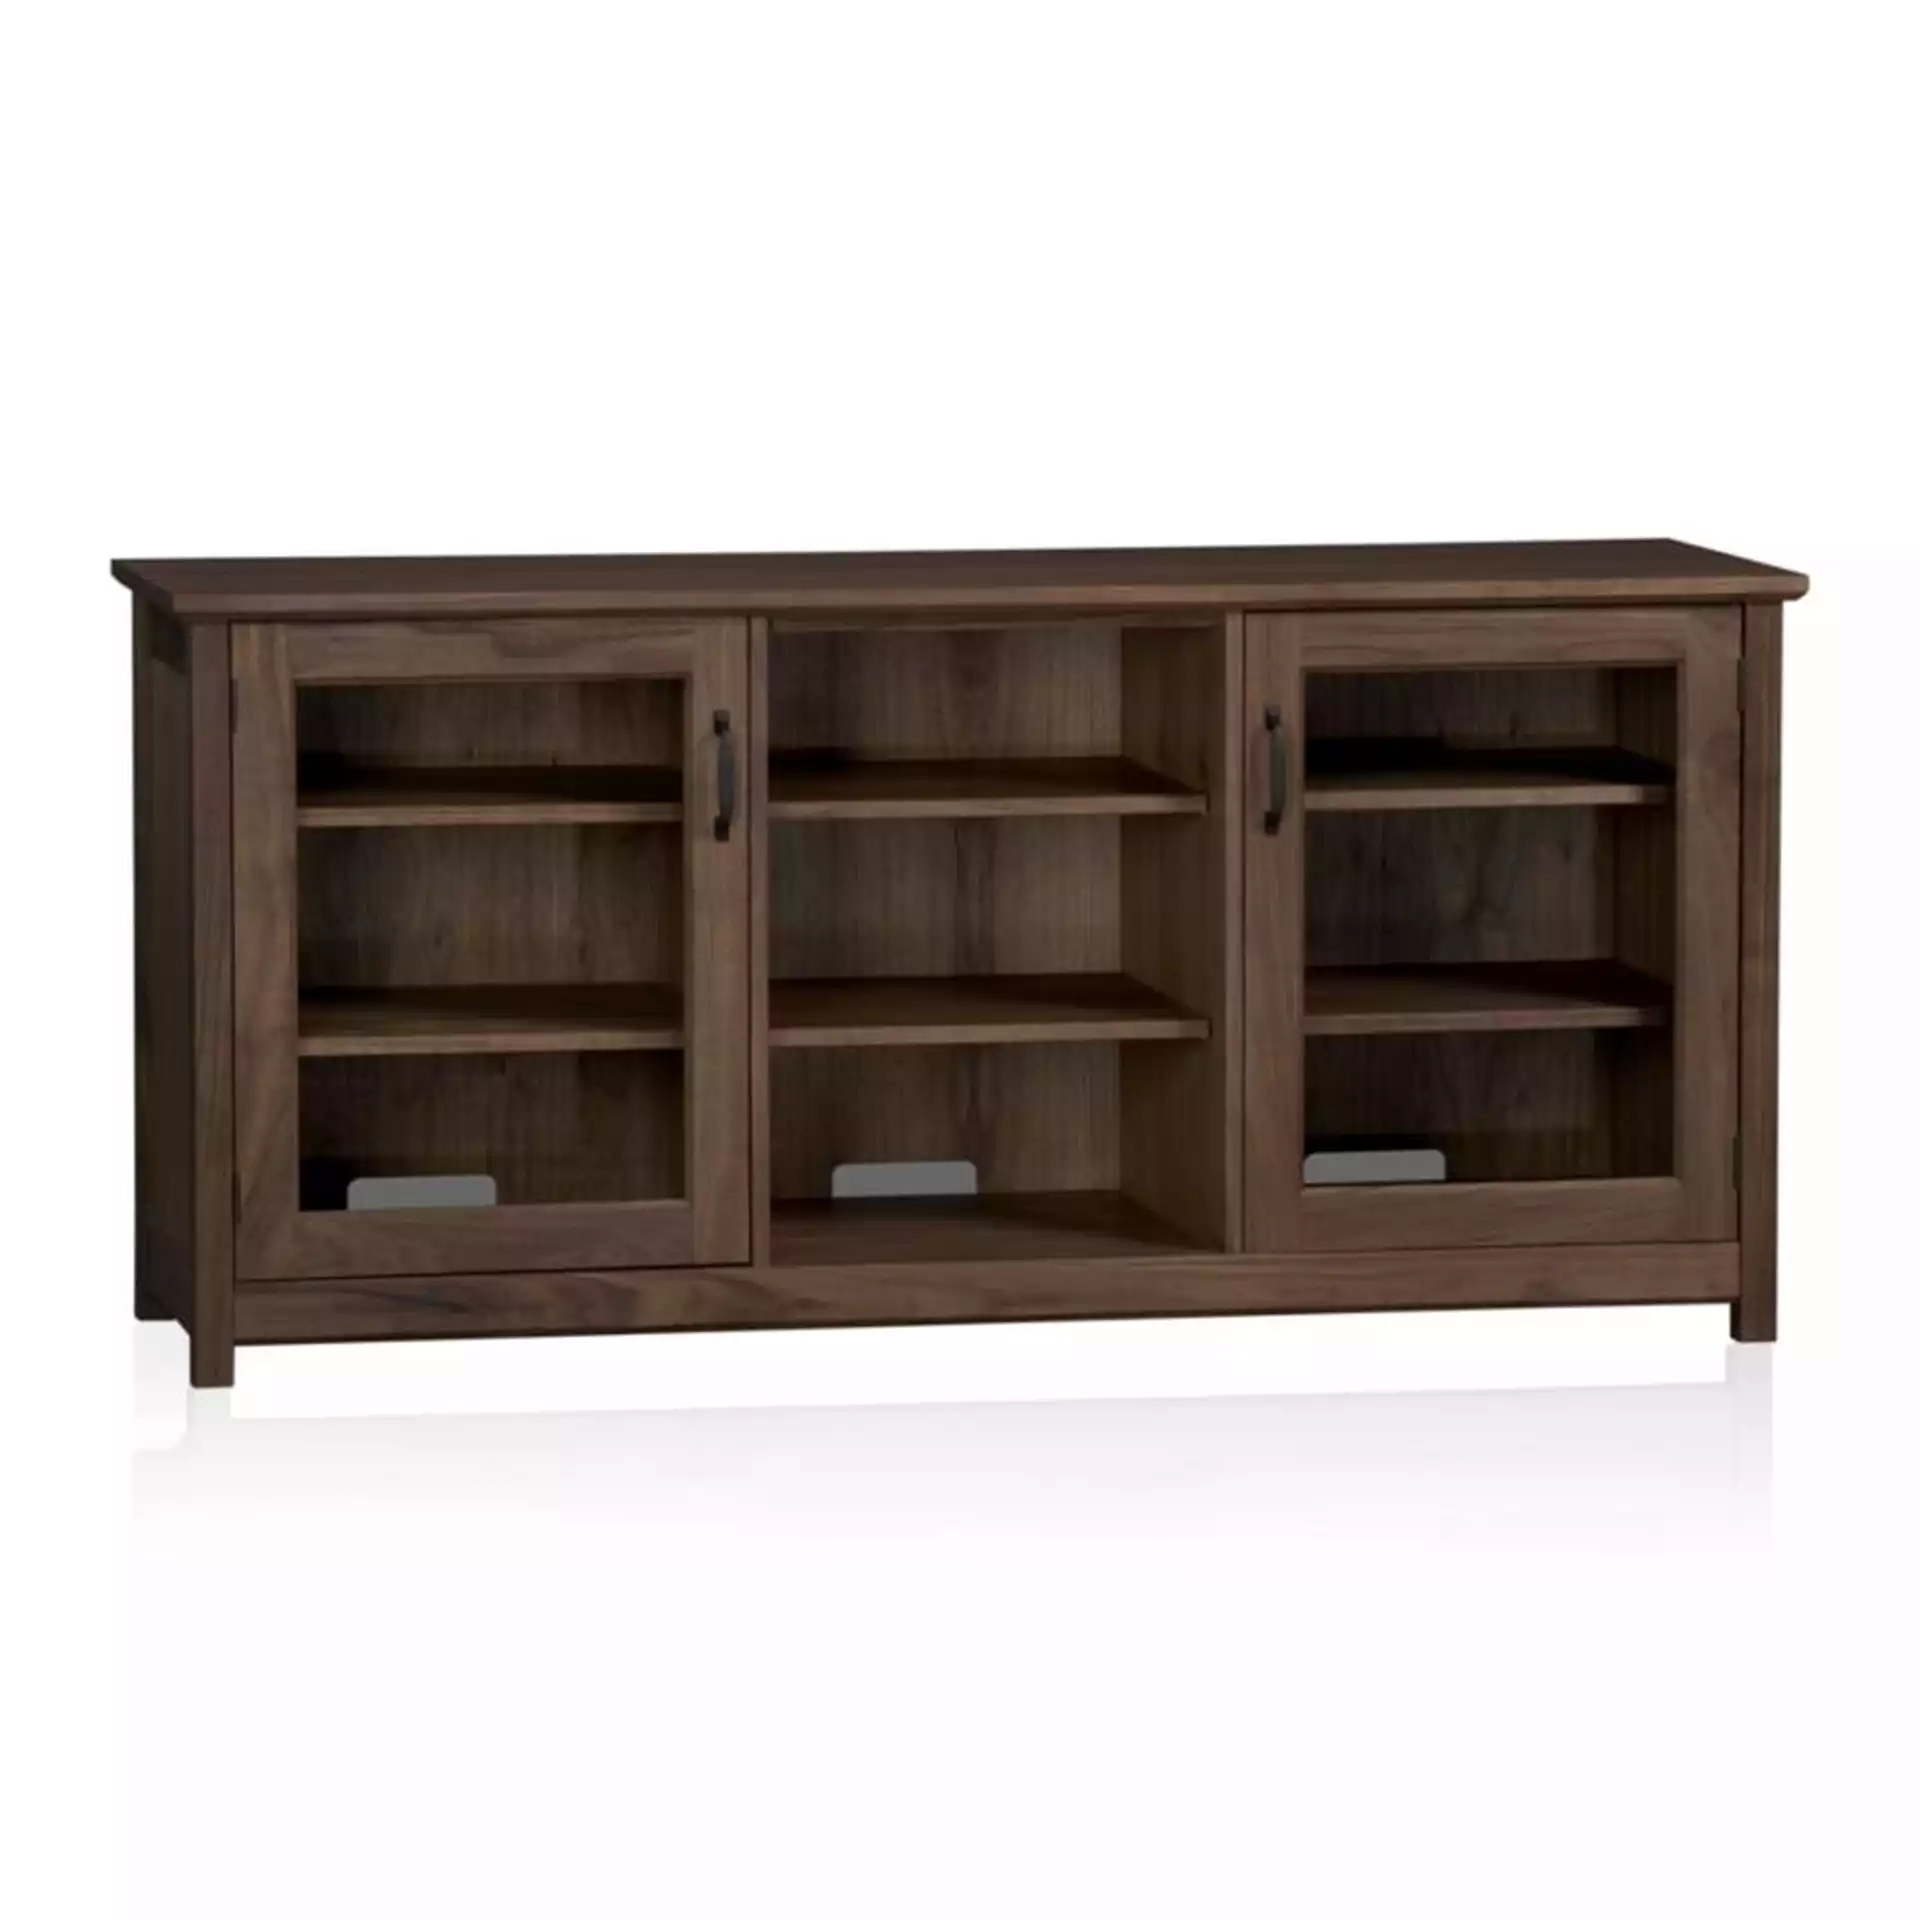 Ainsworth Walnut 64" Media Console with Glass/Wood Doors